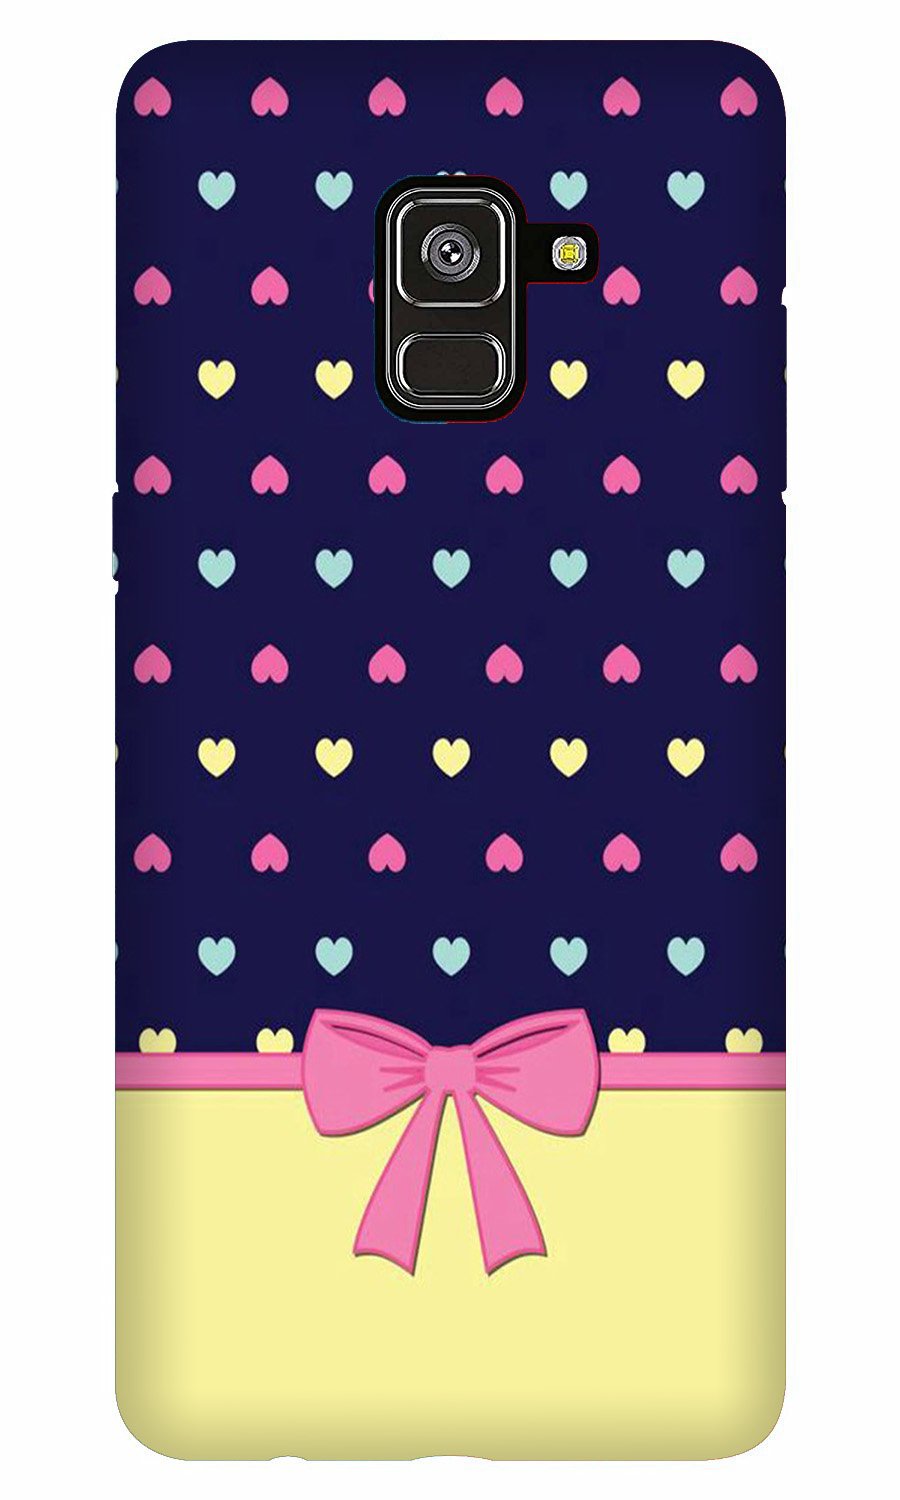 Gift Wrap5 Case for Galaxy A8 Plus